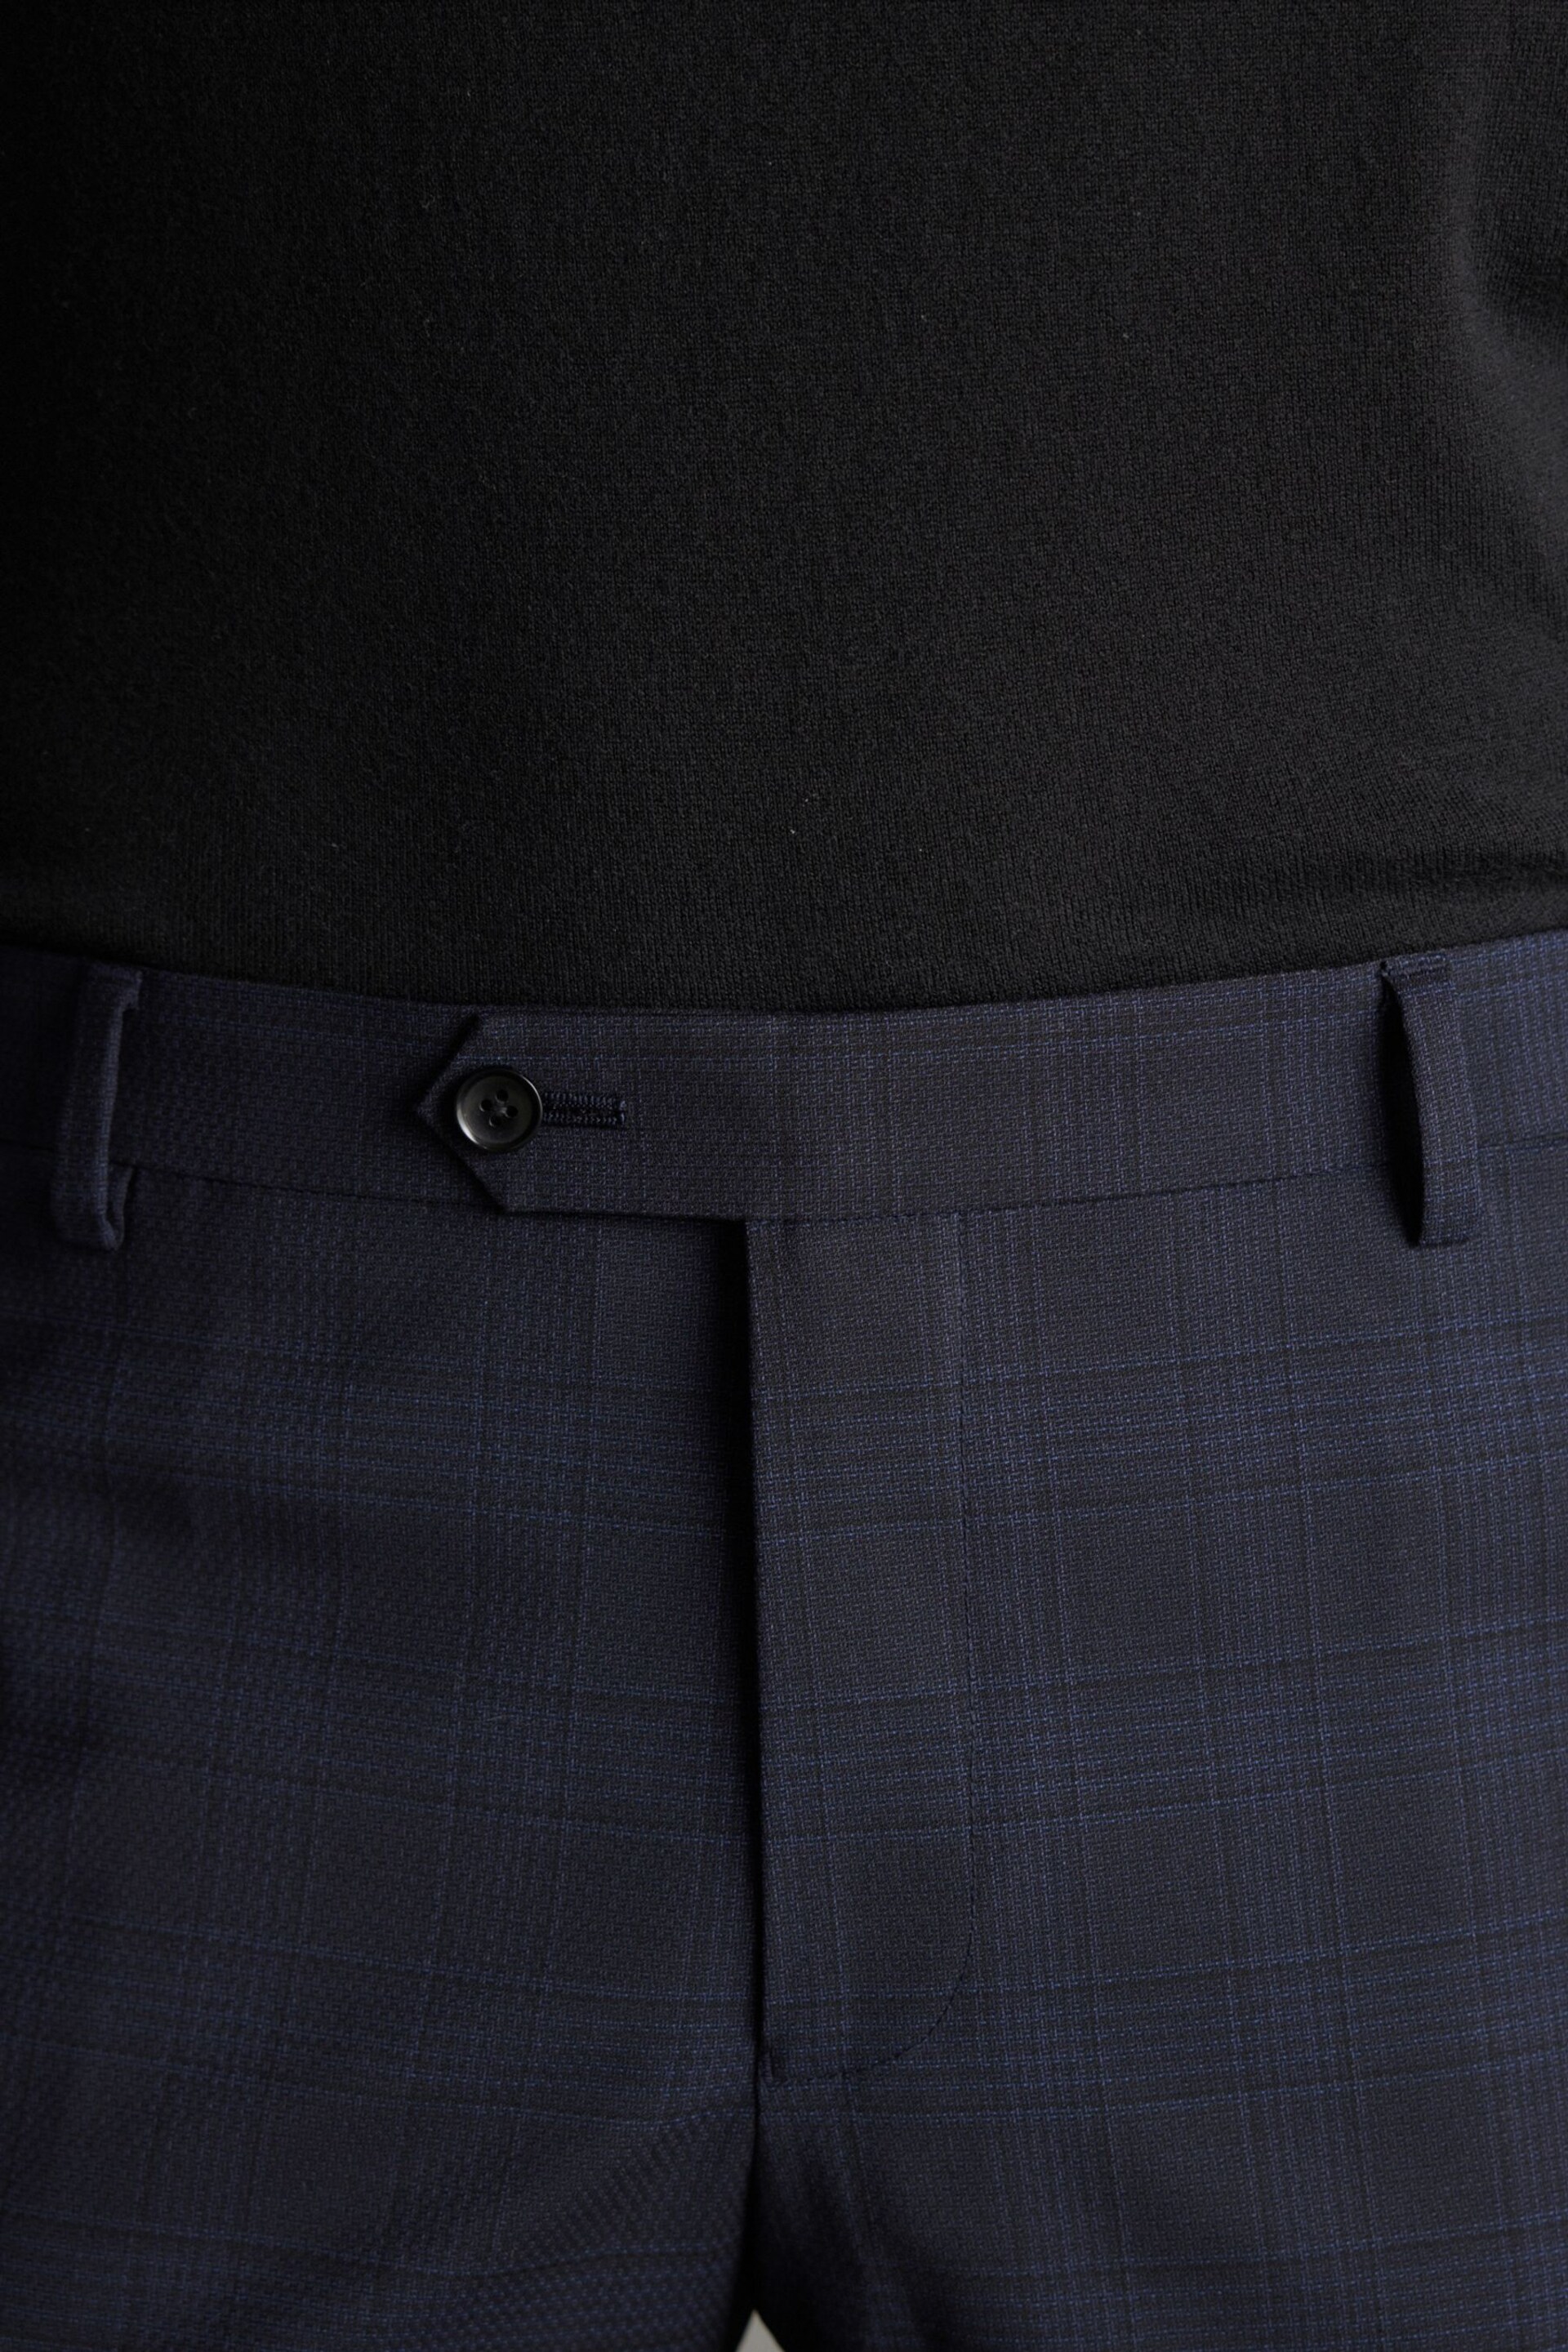 Navy Blue Signature Zignone Italian Fabric Check Suit Trousers - Image 4 of 10